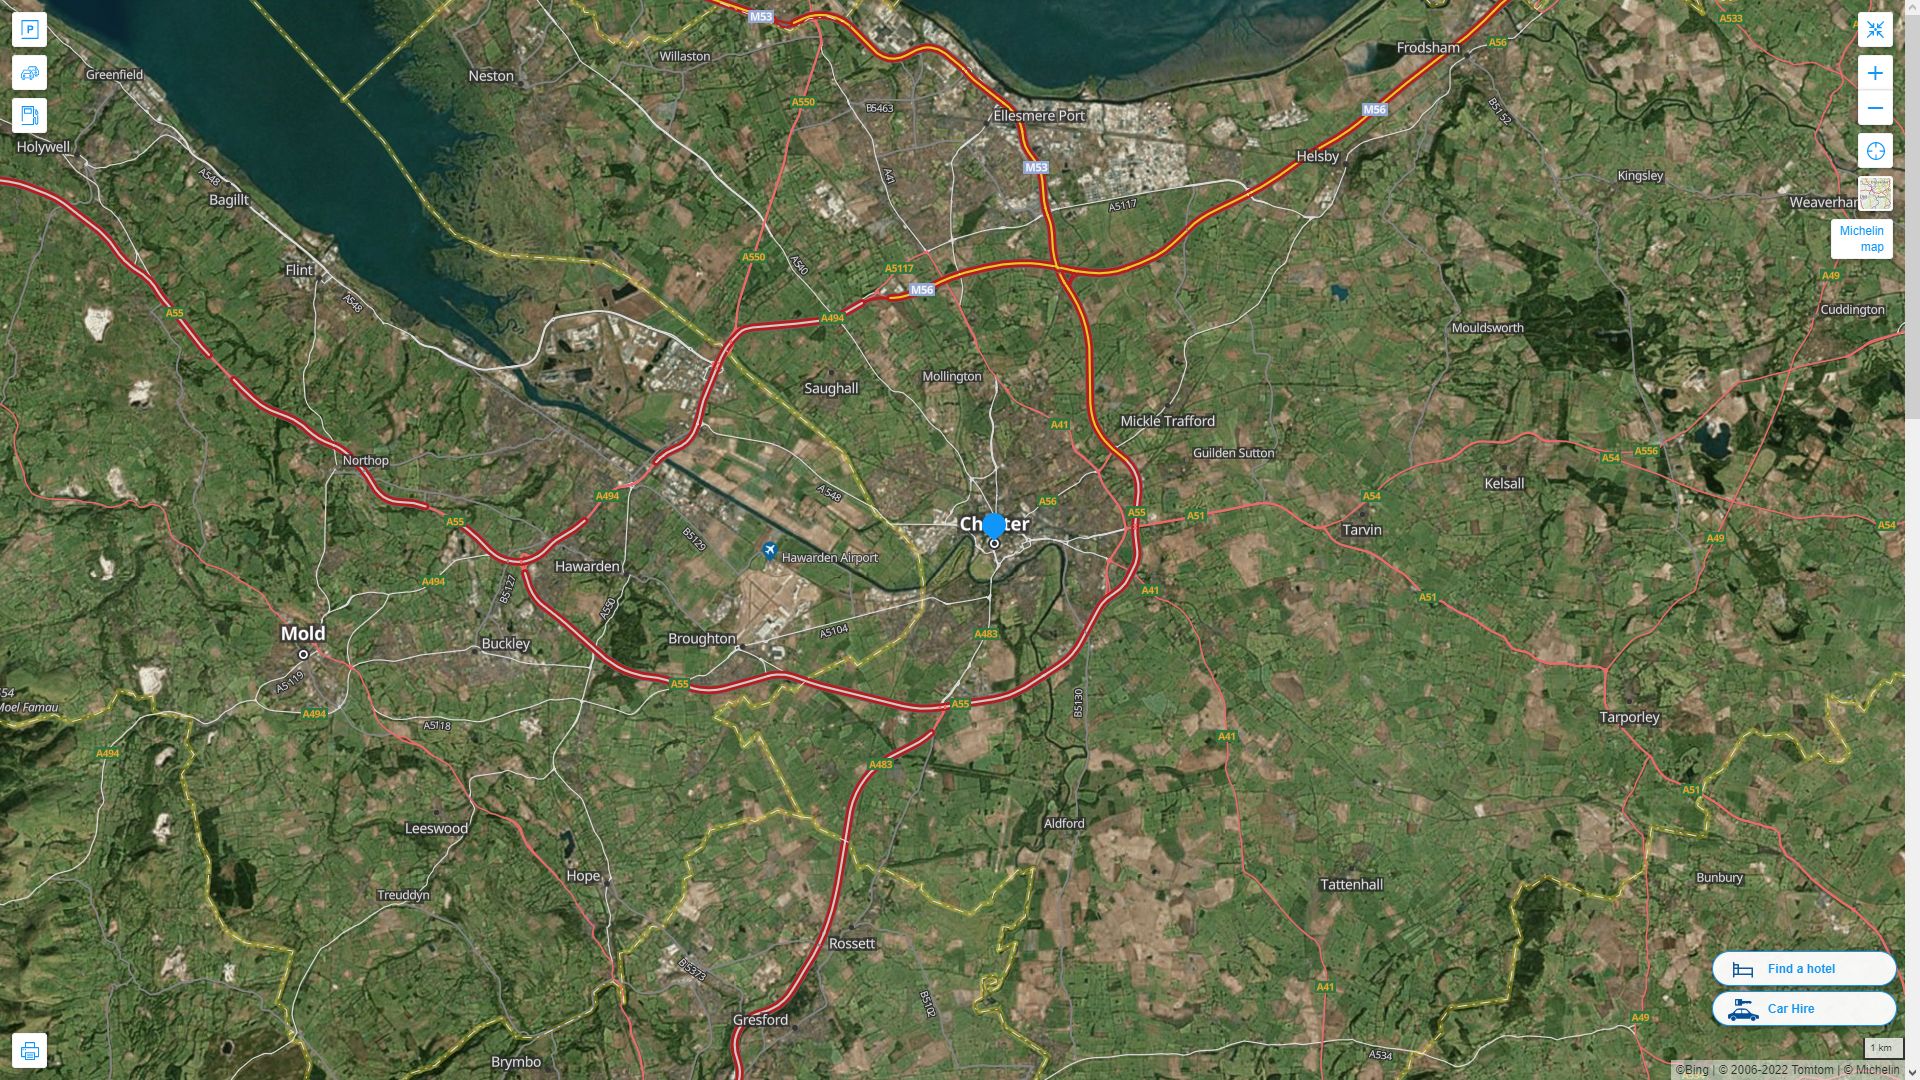 Chester Highway and Road Map with Satellite View